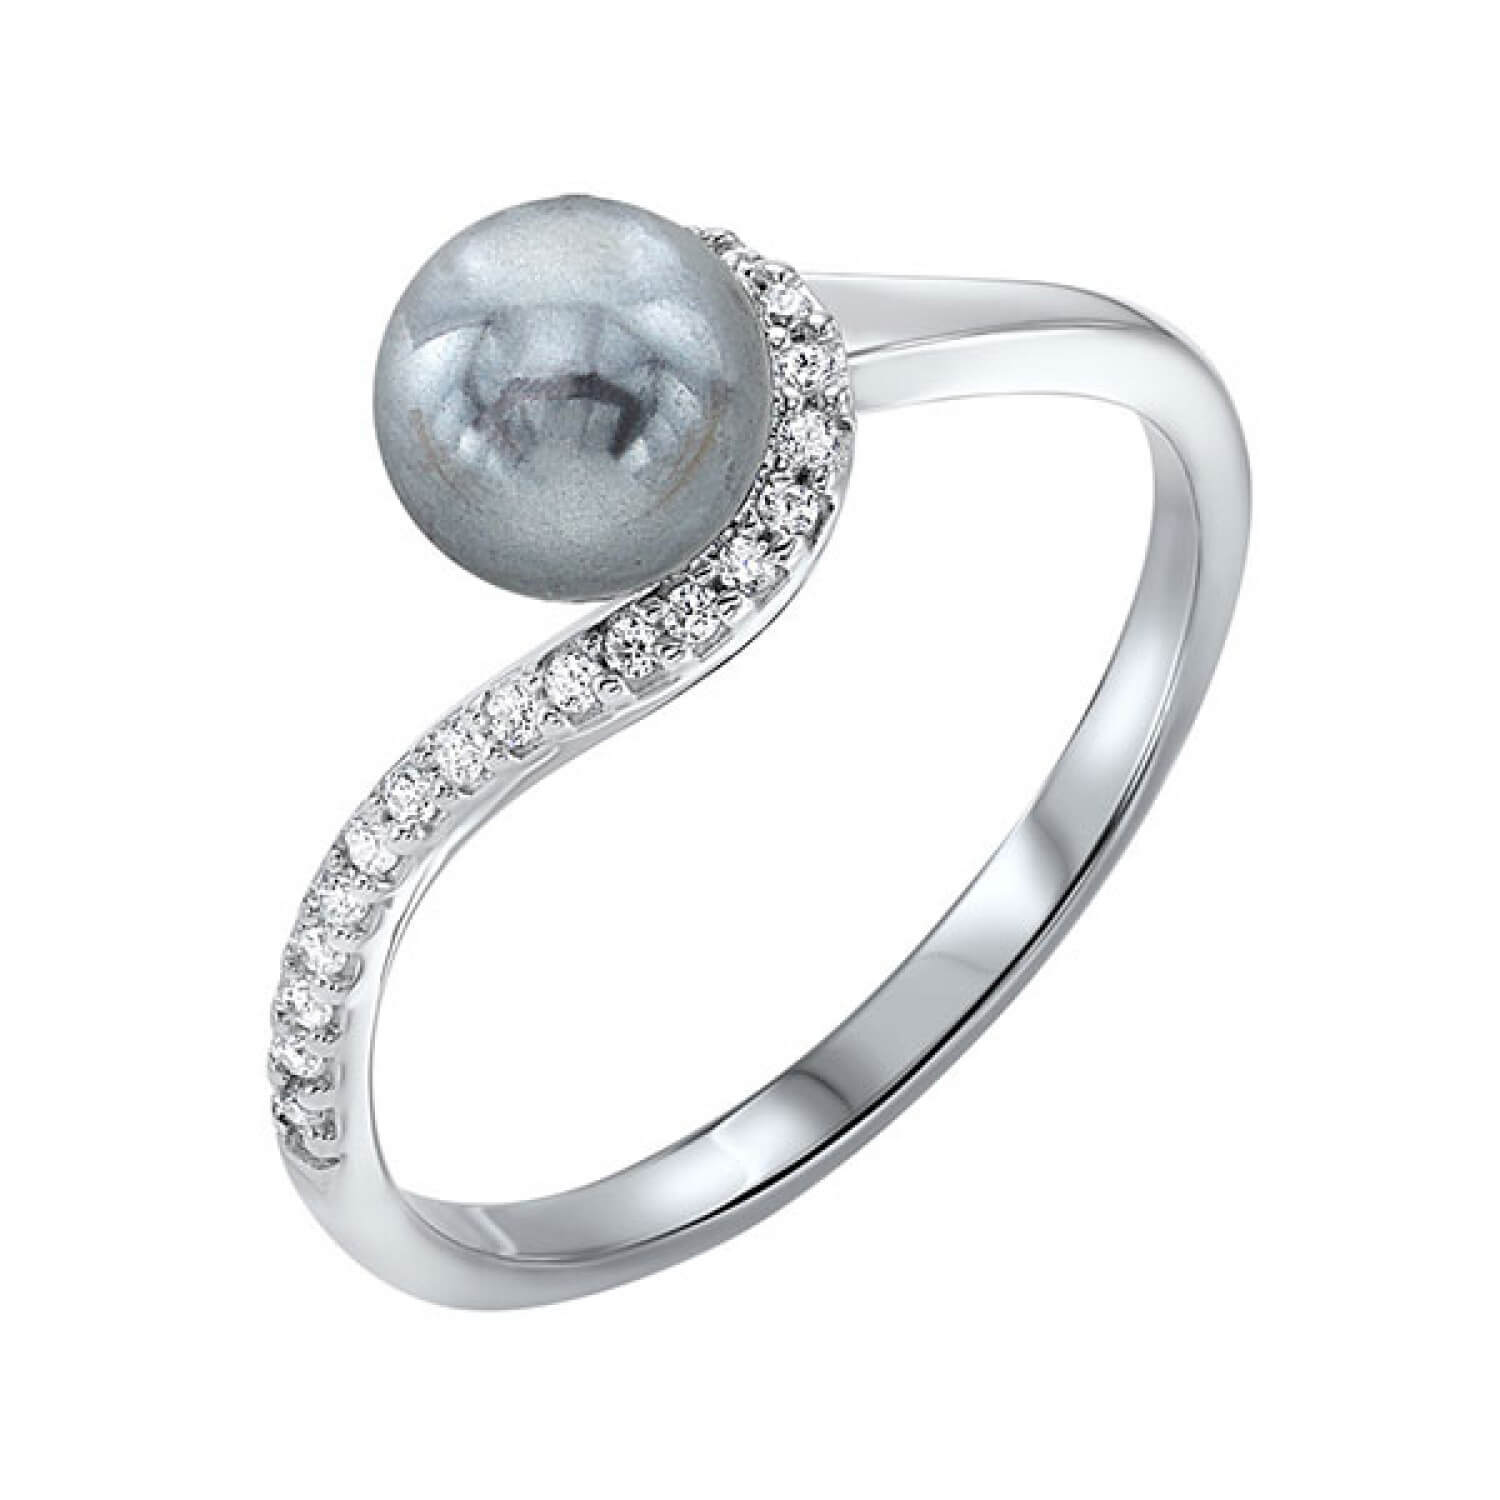 Tahitian Black Pearl Ring in White Gold with Diamonds – Maui Divers Jewelry-hautamhiepplus.vn